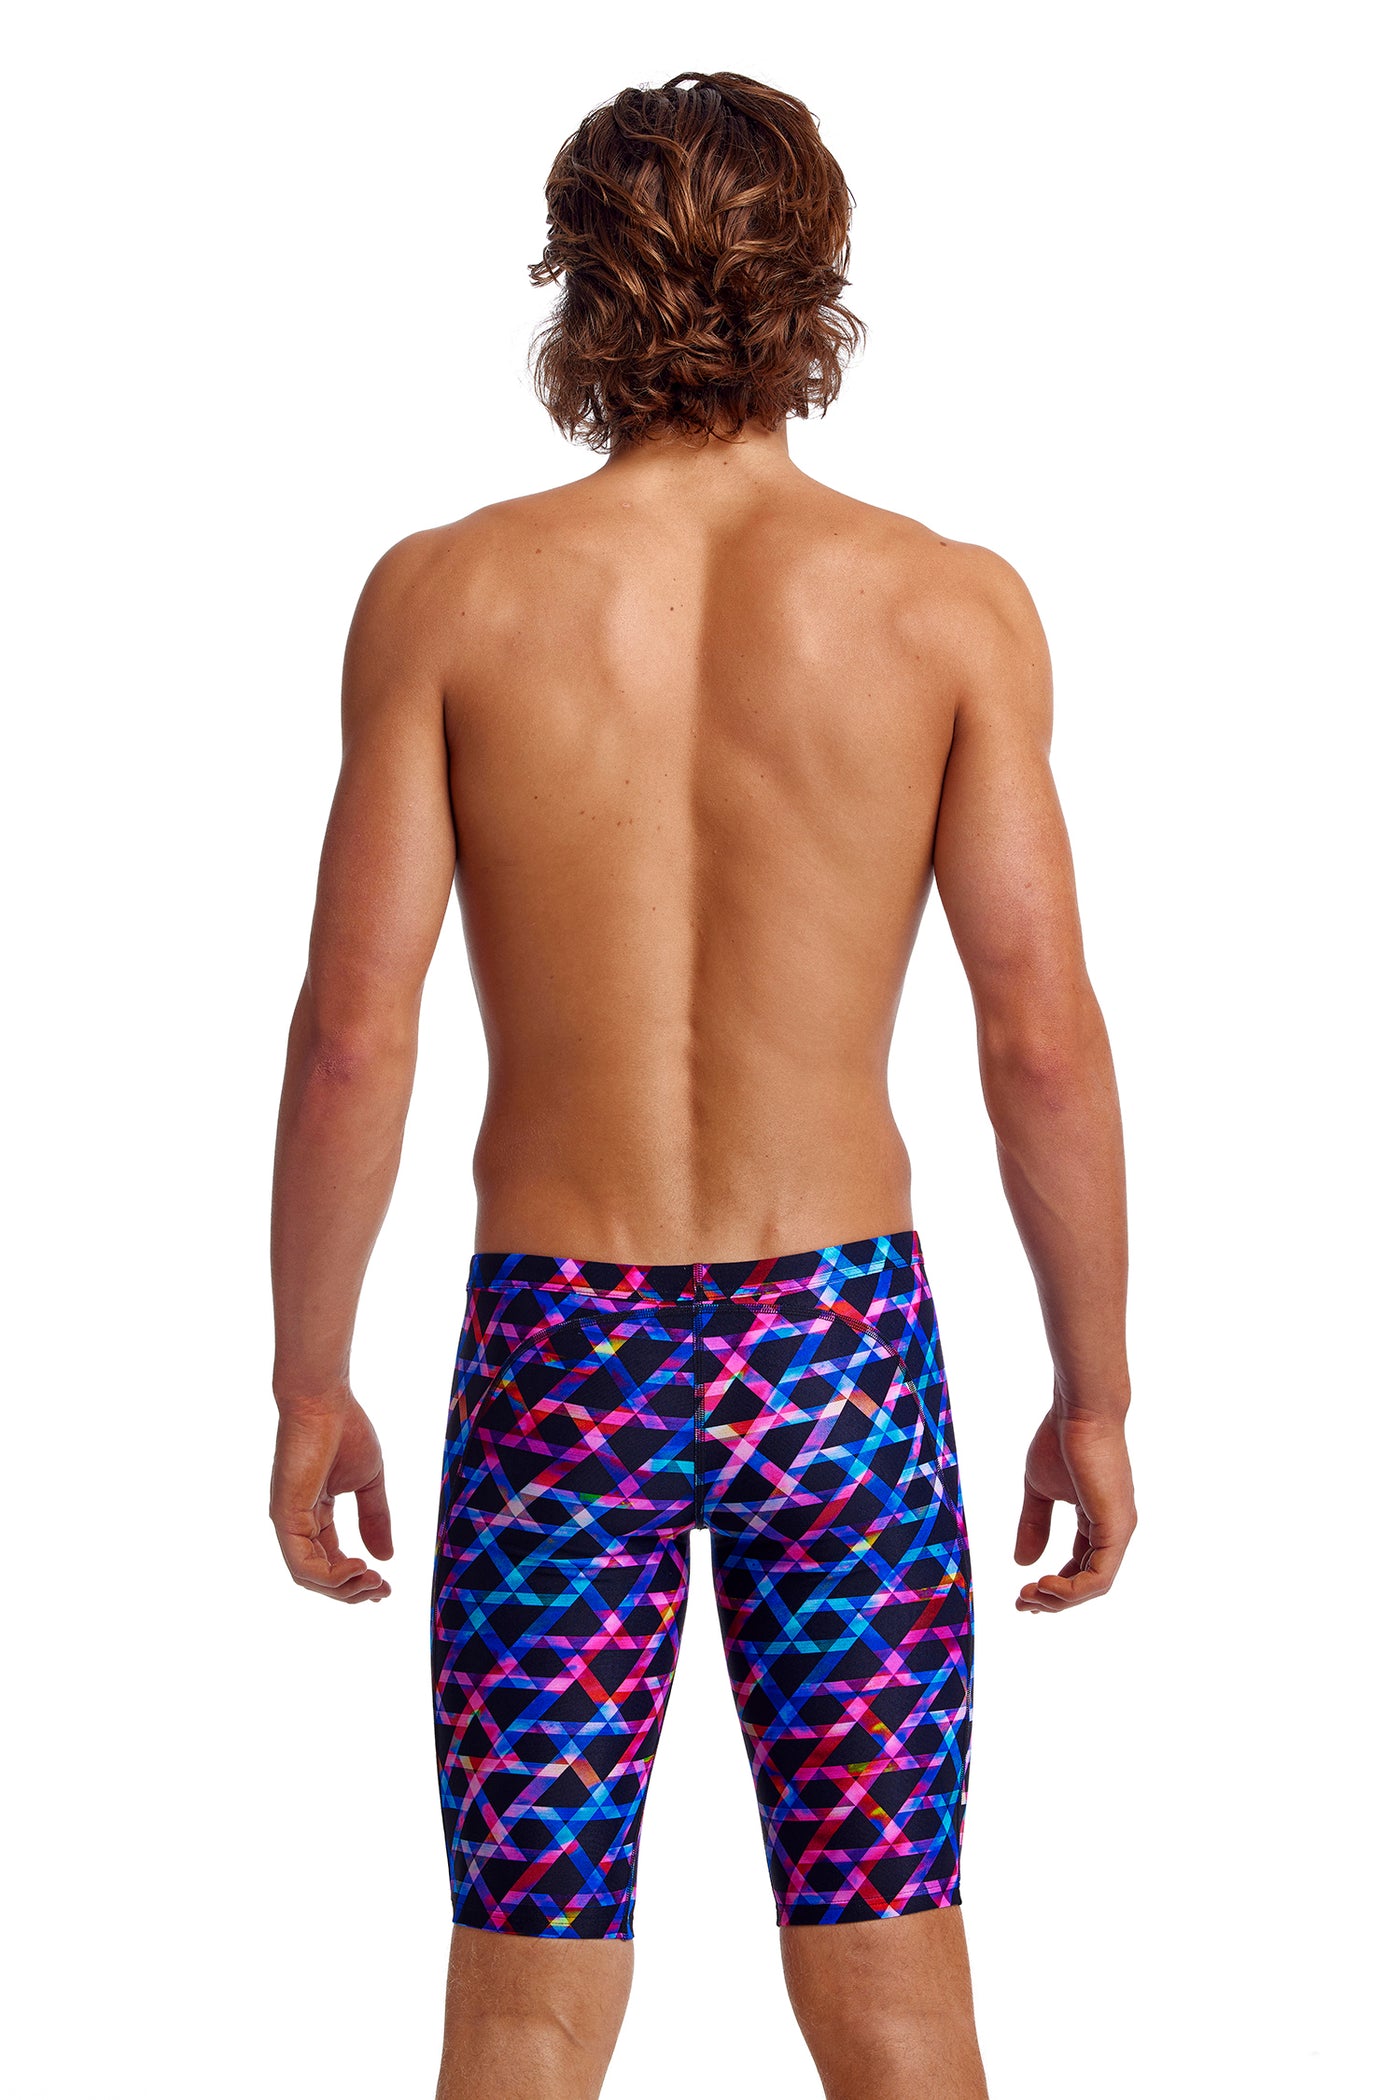 Funky Trunks Men's Training Jammers Strapping